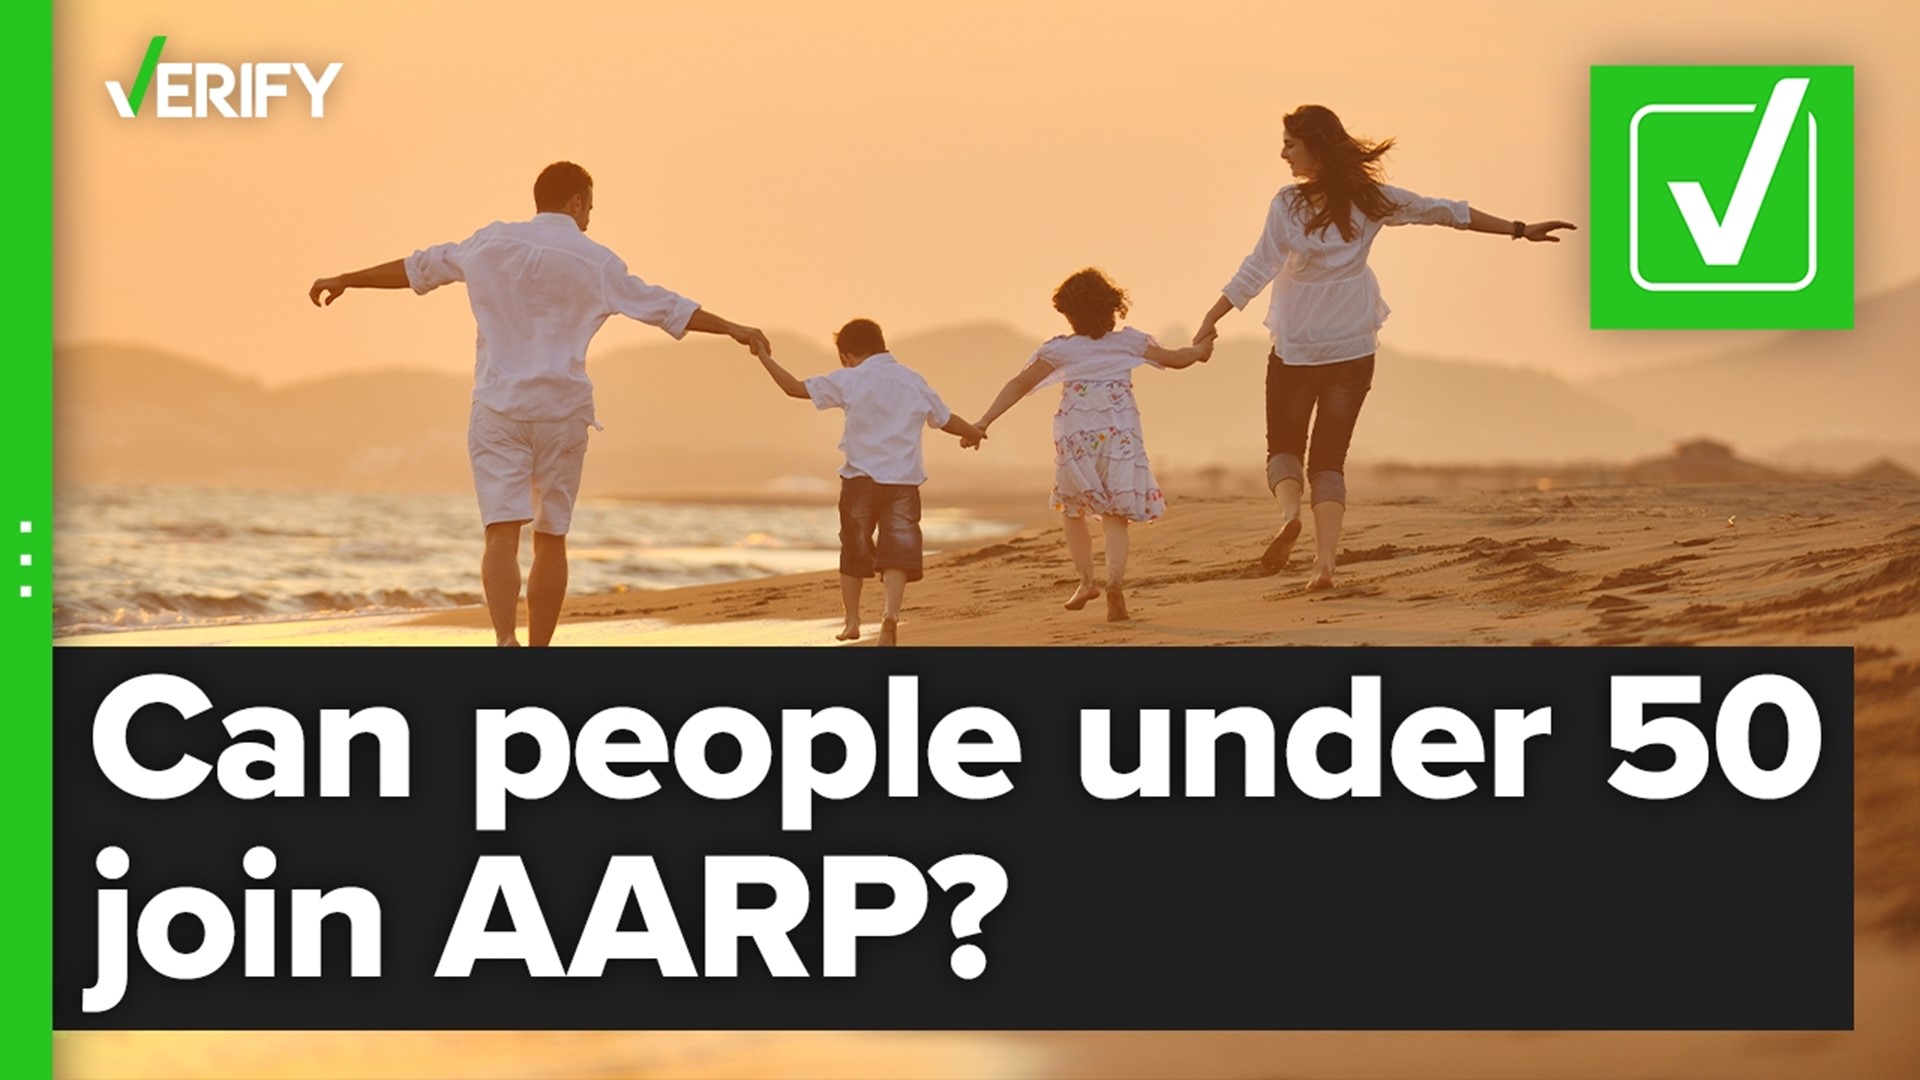 Can anyone join AARP regardless of their age? The VERIFY team confirms this is true.